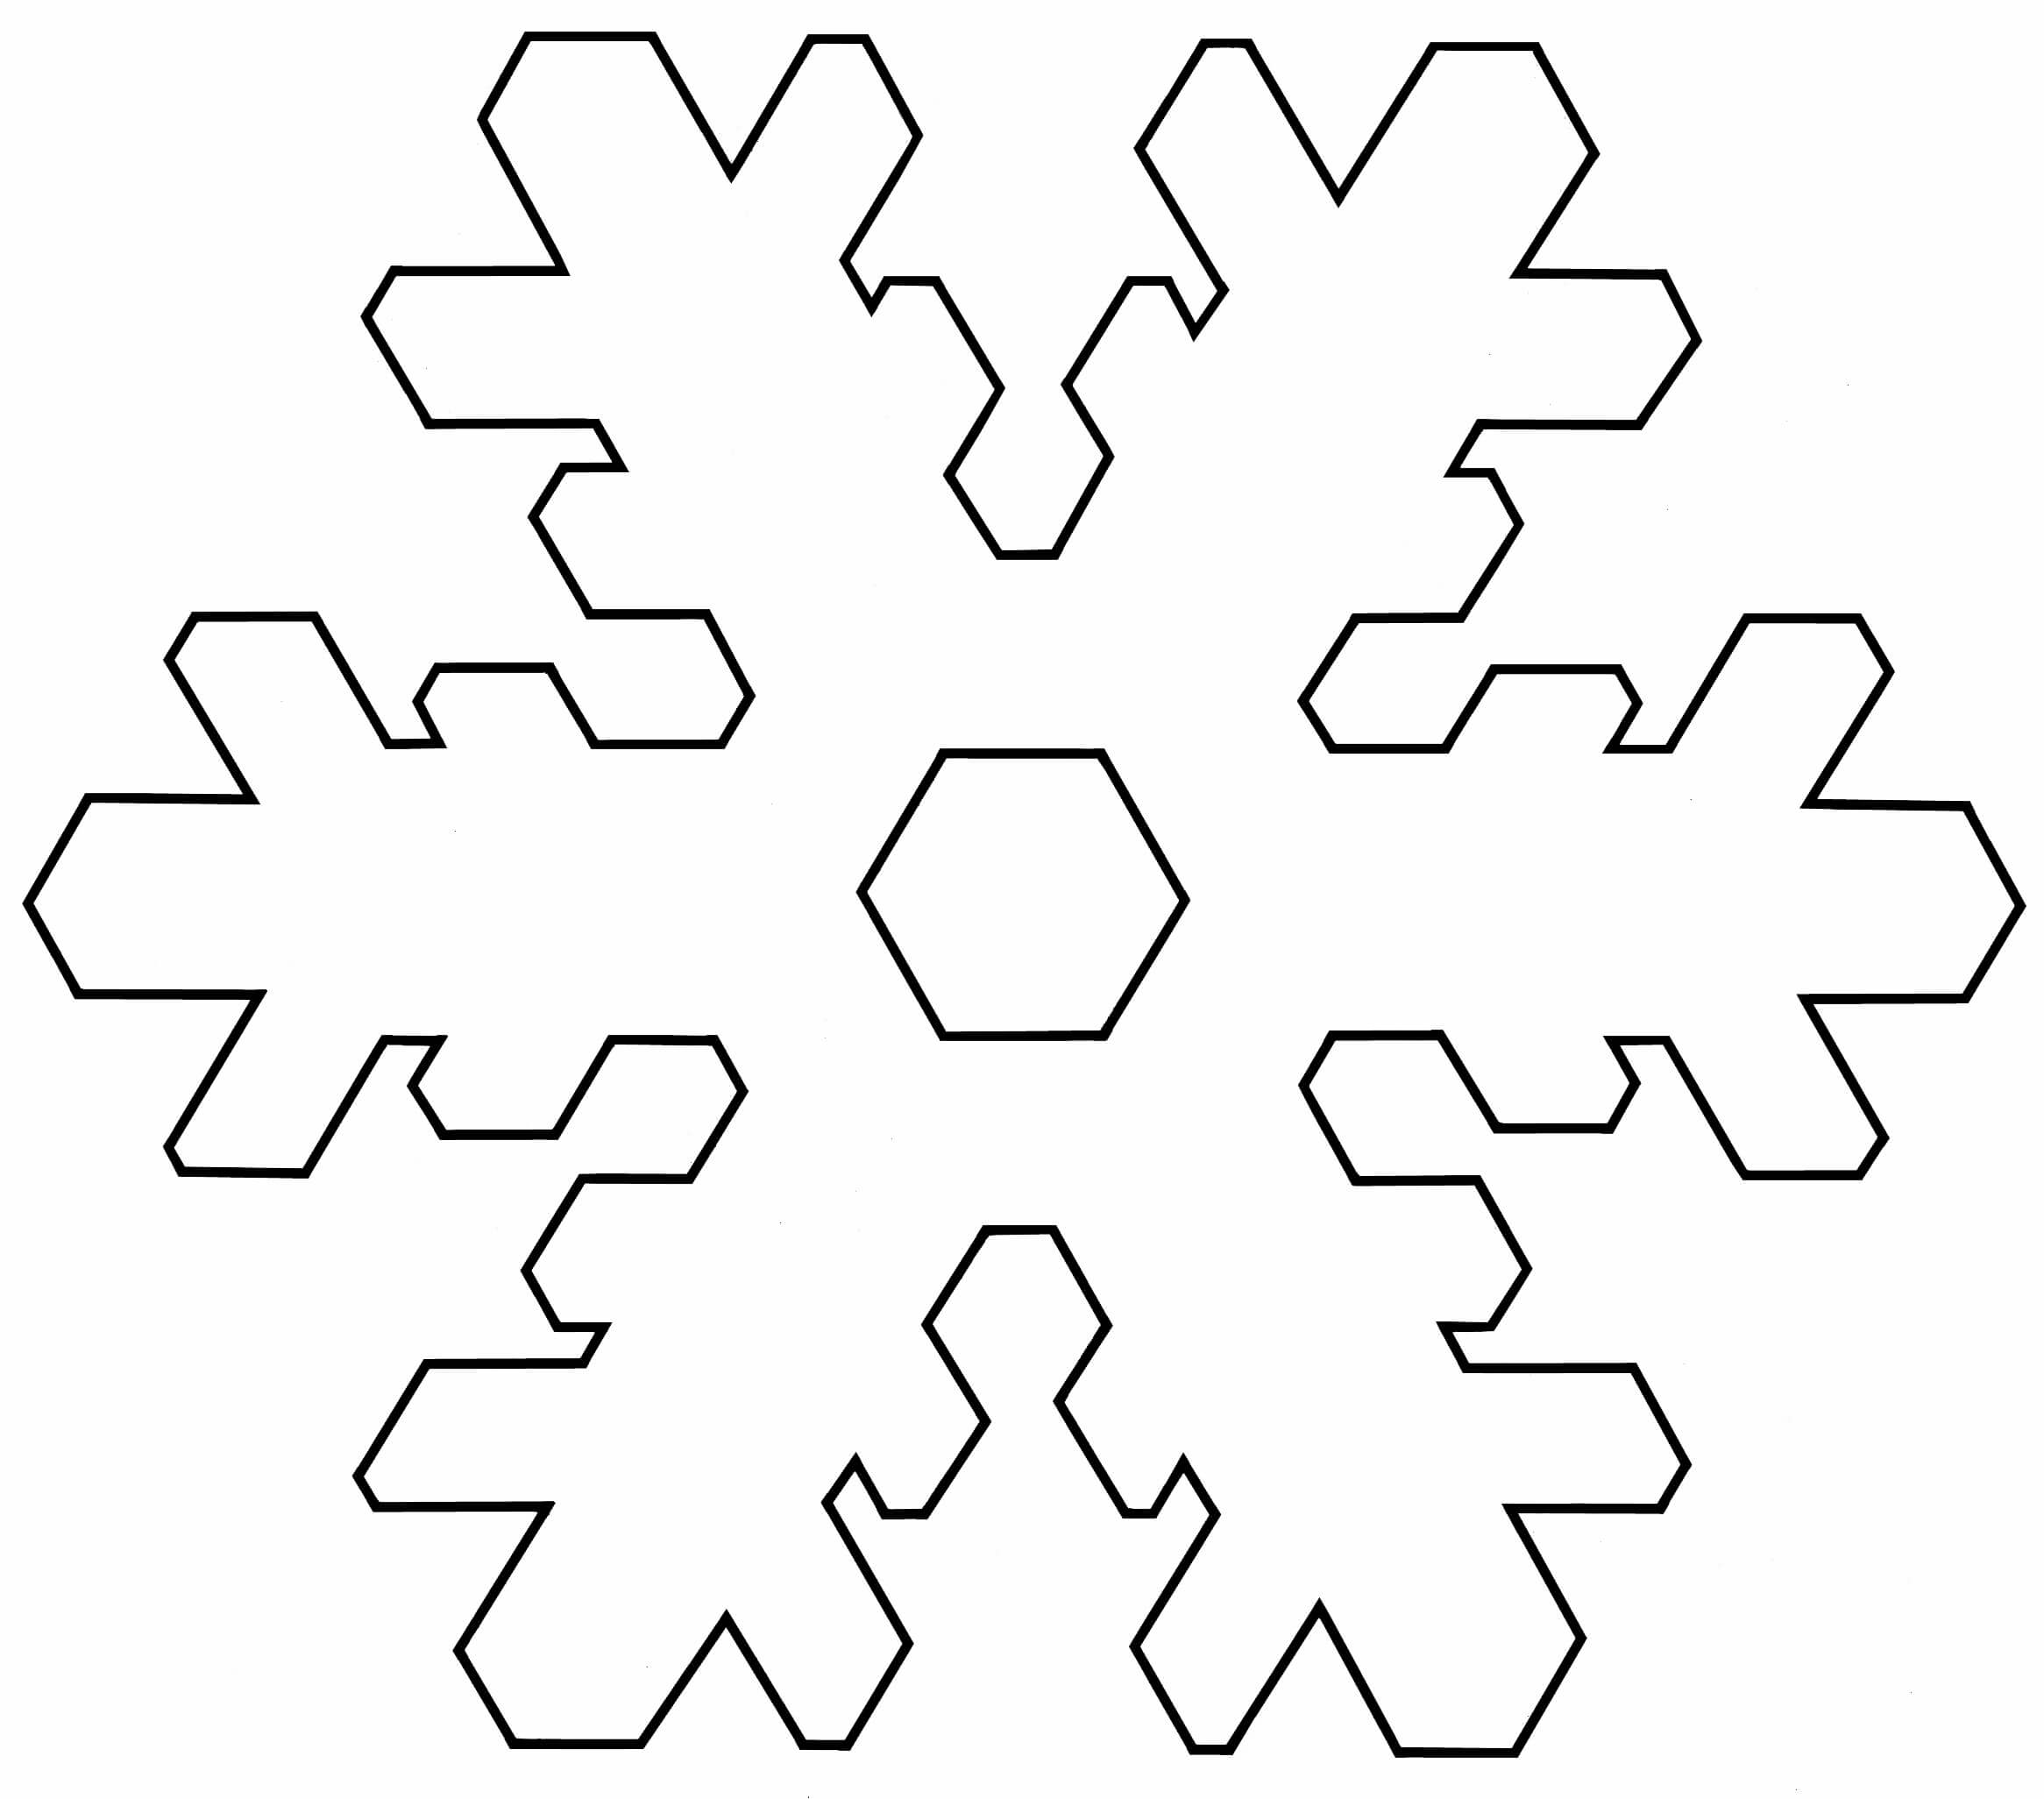 Snowflake Template With 6 Points | Templates And Samples For Blank Snowflake Template